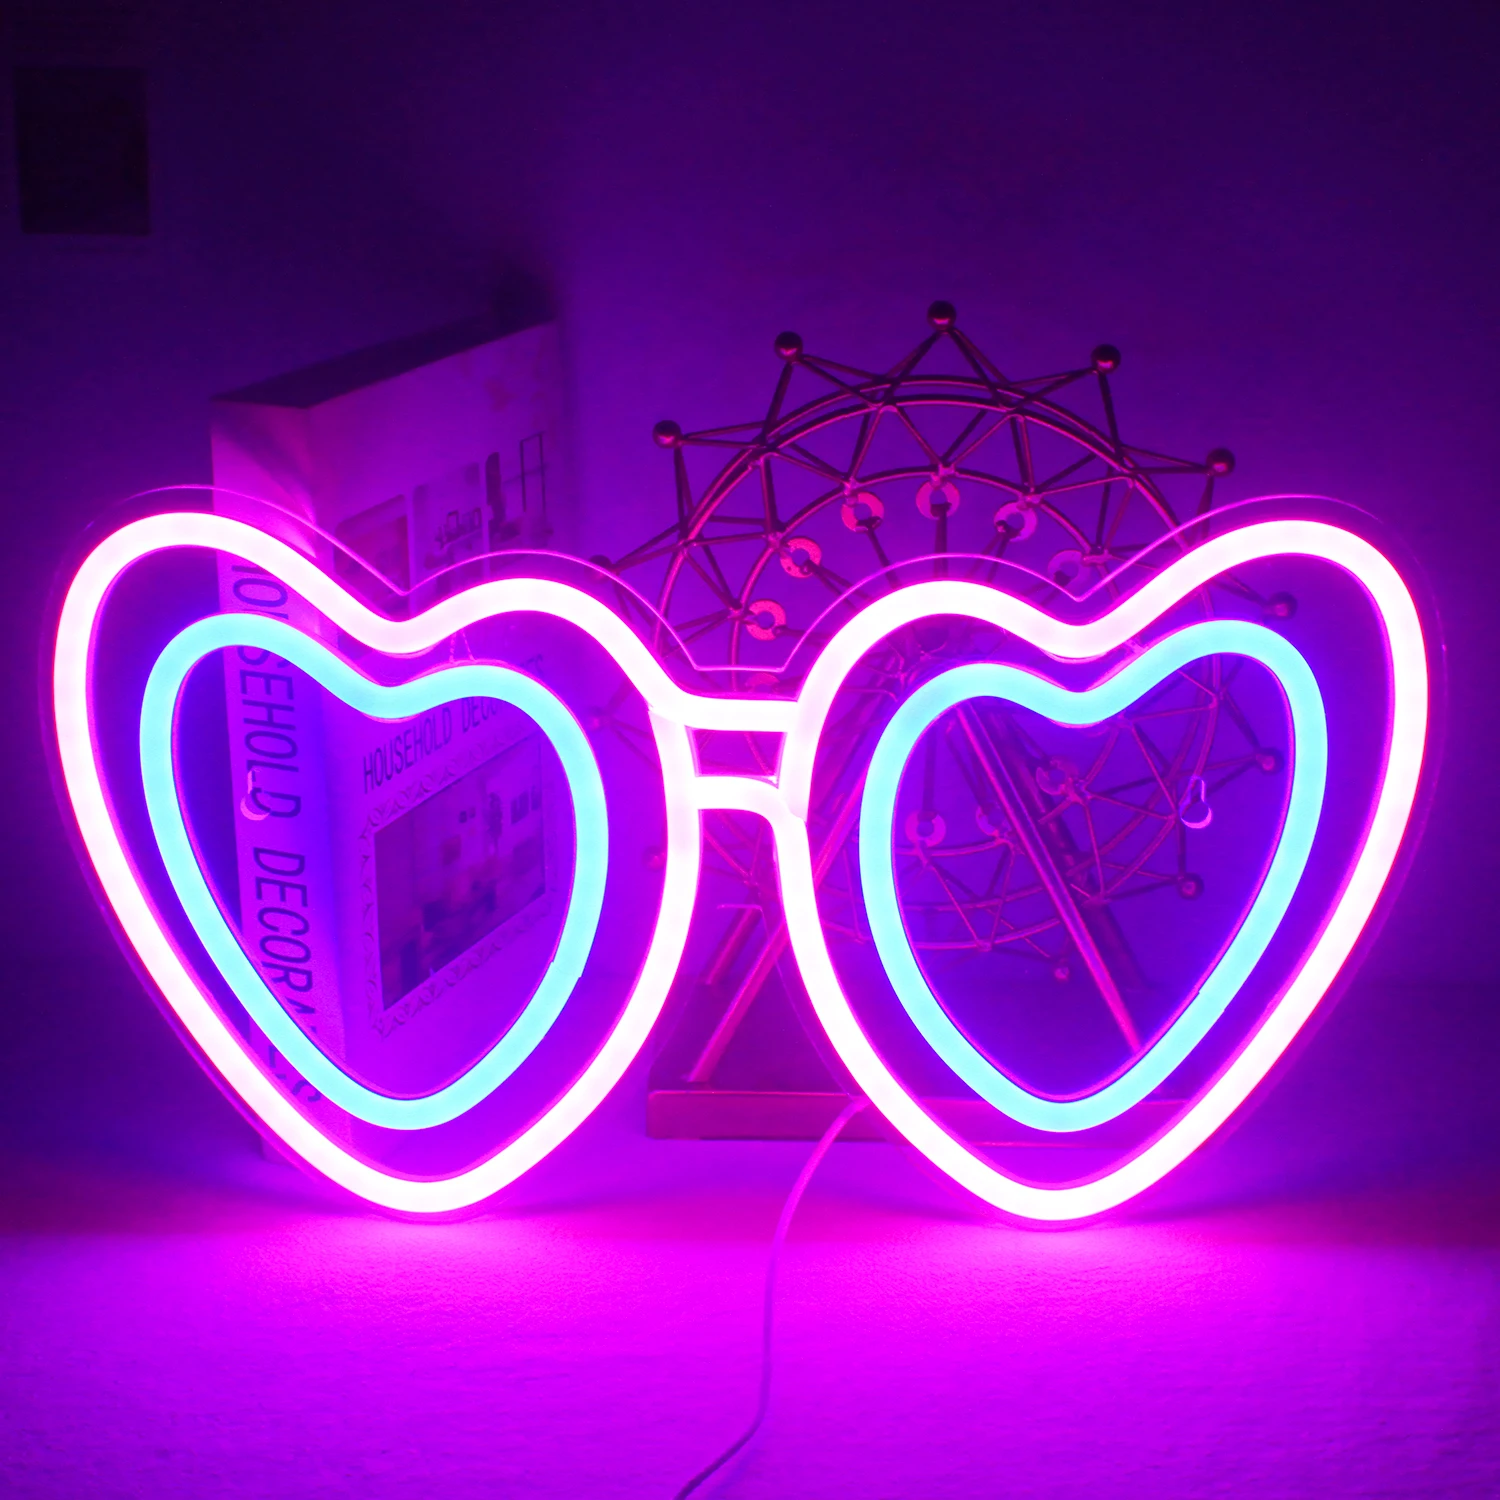 Neon Sign LED Cartoon Sunglasses Wall Hanging Neon Light Bar Club Drink Restaurant Shop Party Aesthetic Room Decor LED Light drinks neon signs cool drink cup led neon signs bar neon signs for wall decor usb bar club restaurant cafes shops party neon